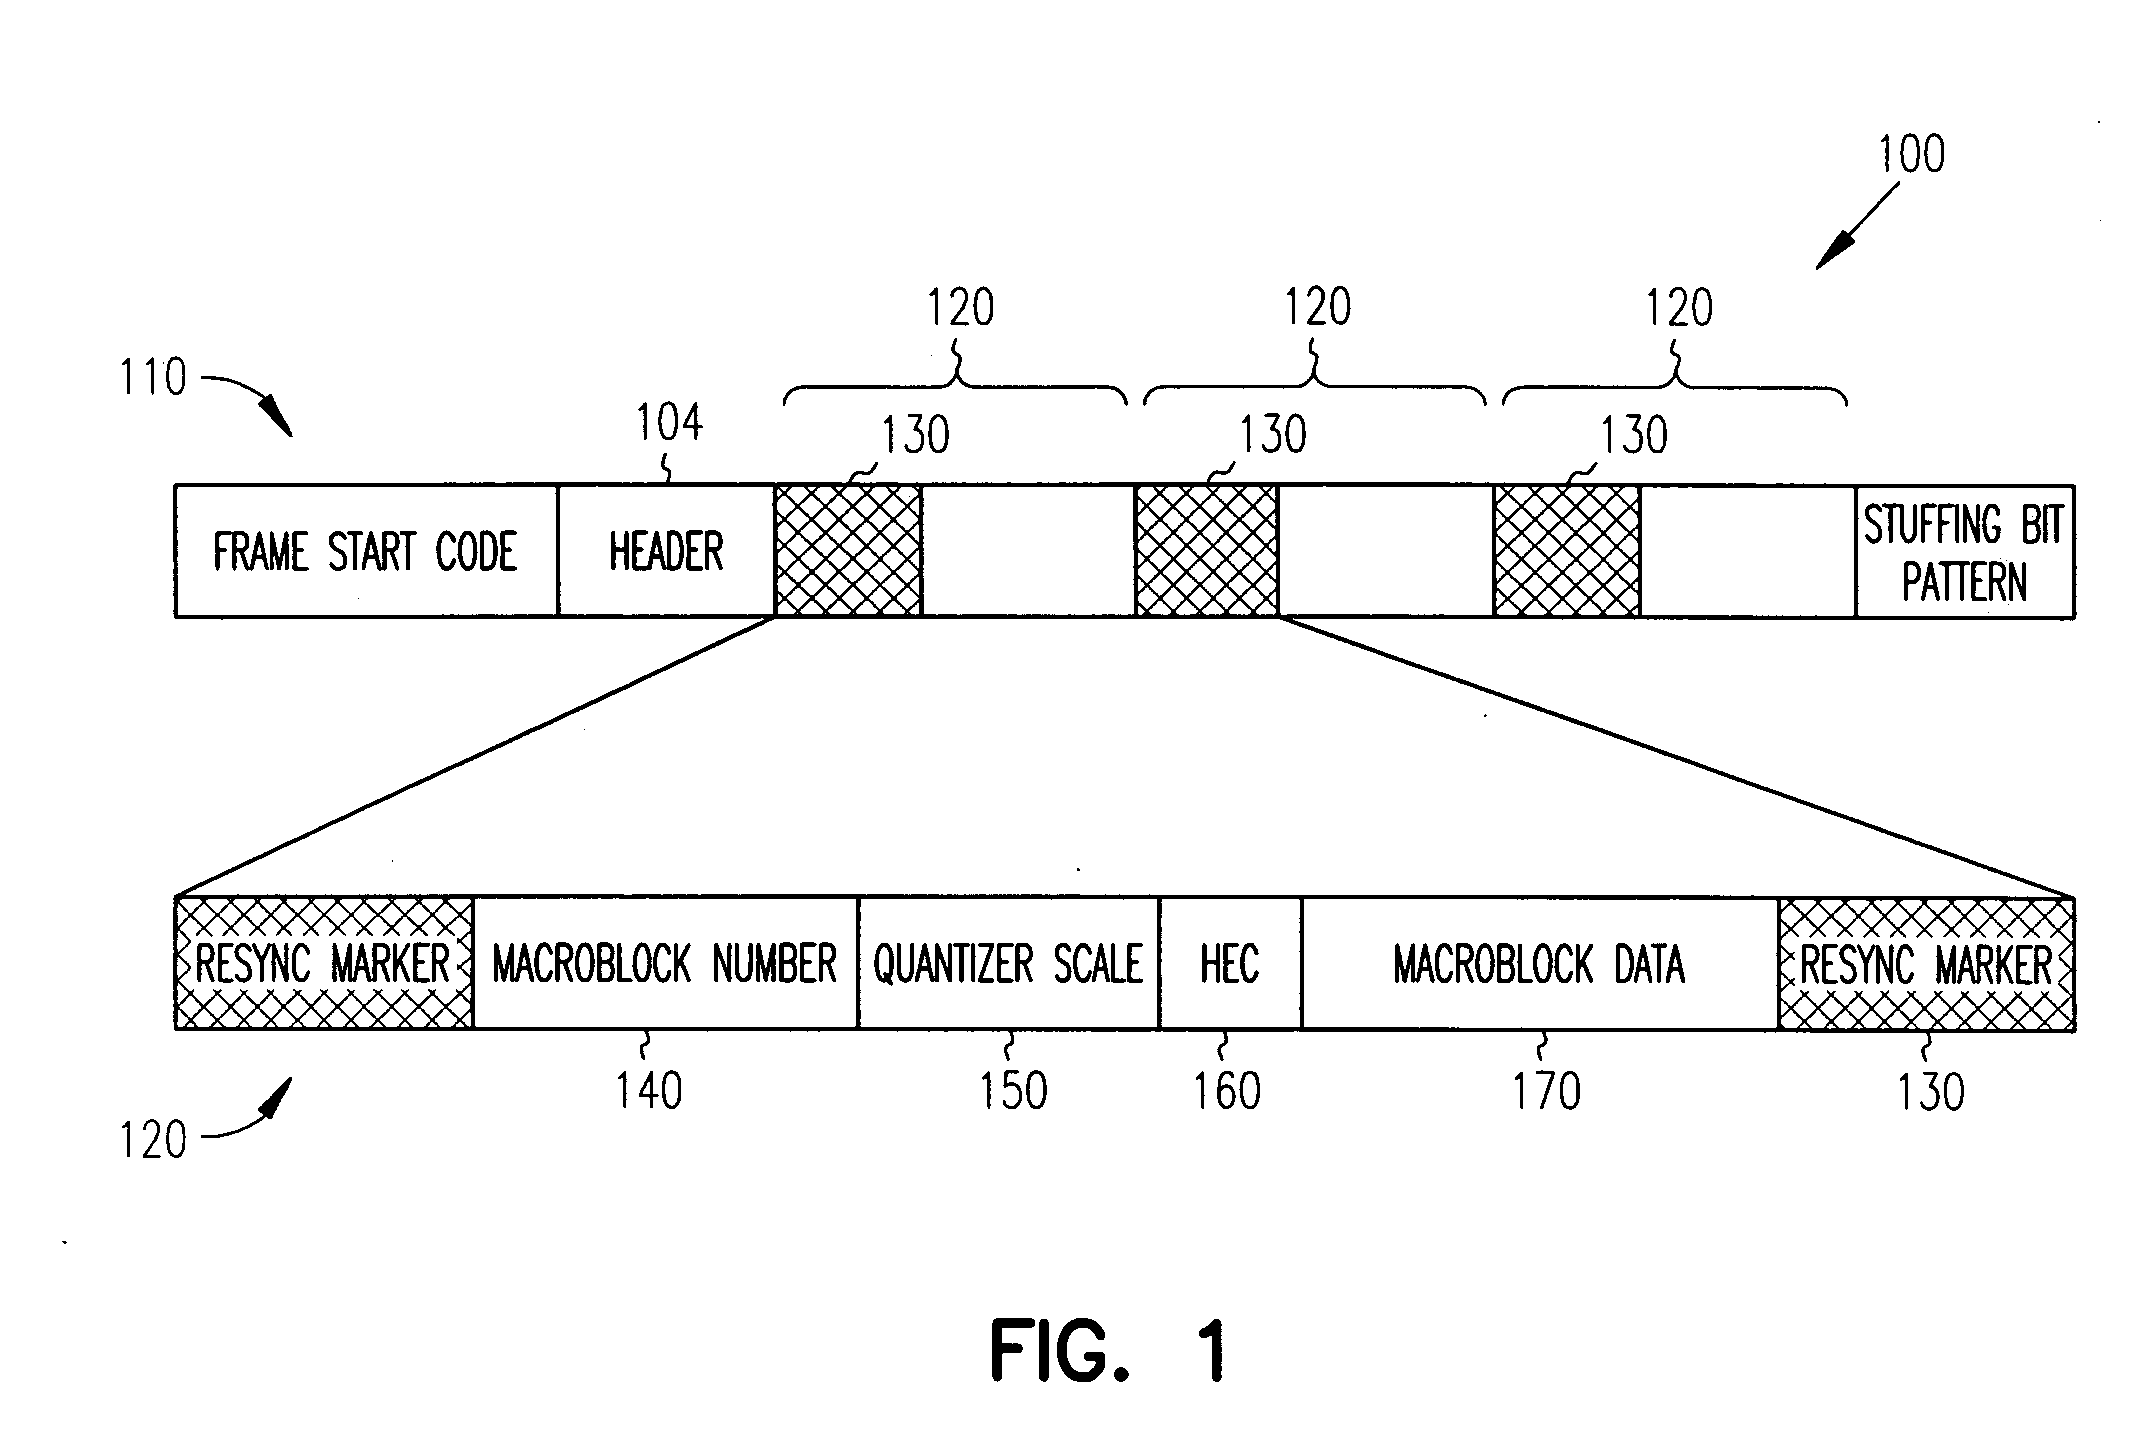 System, method, and apparatus for error concealment in coded video signals